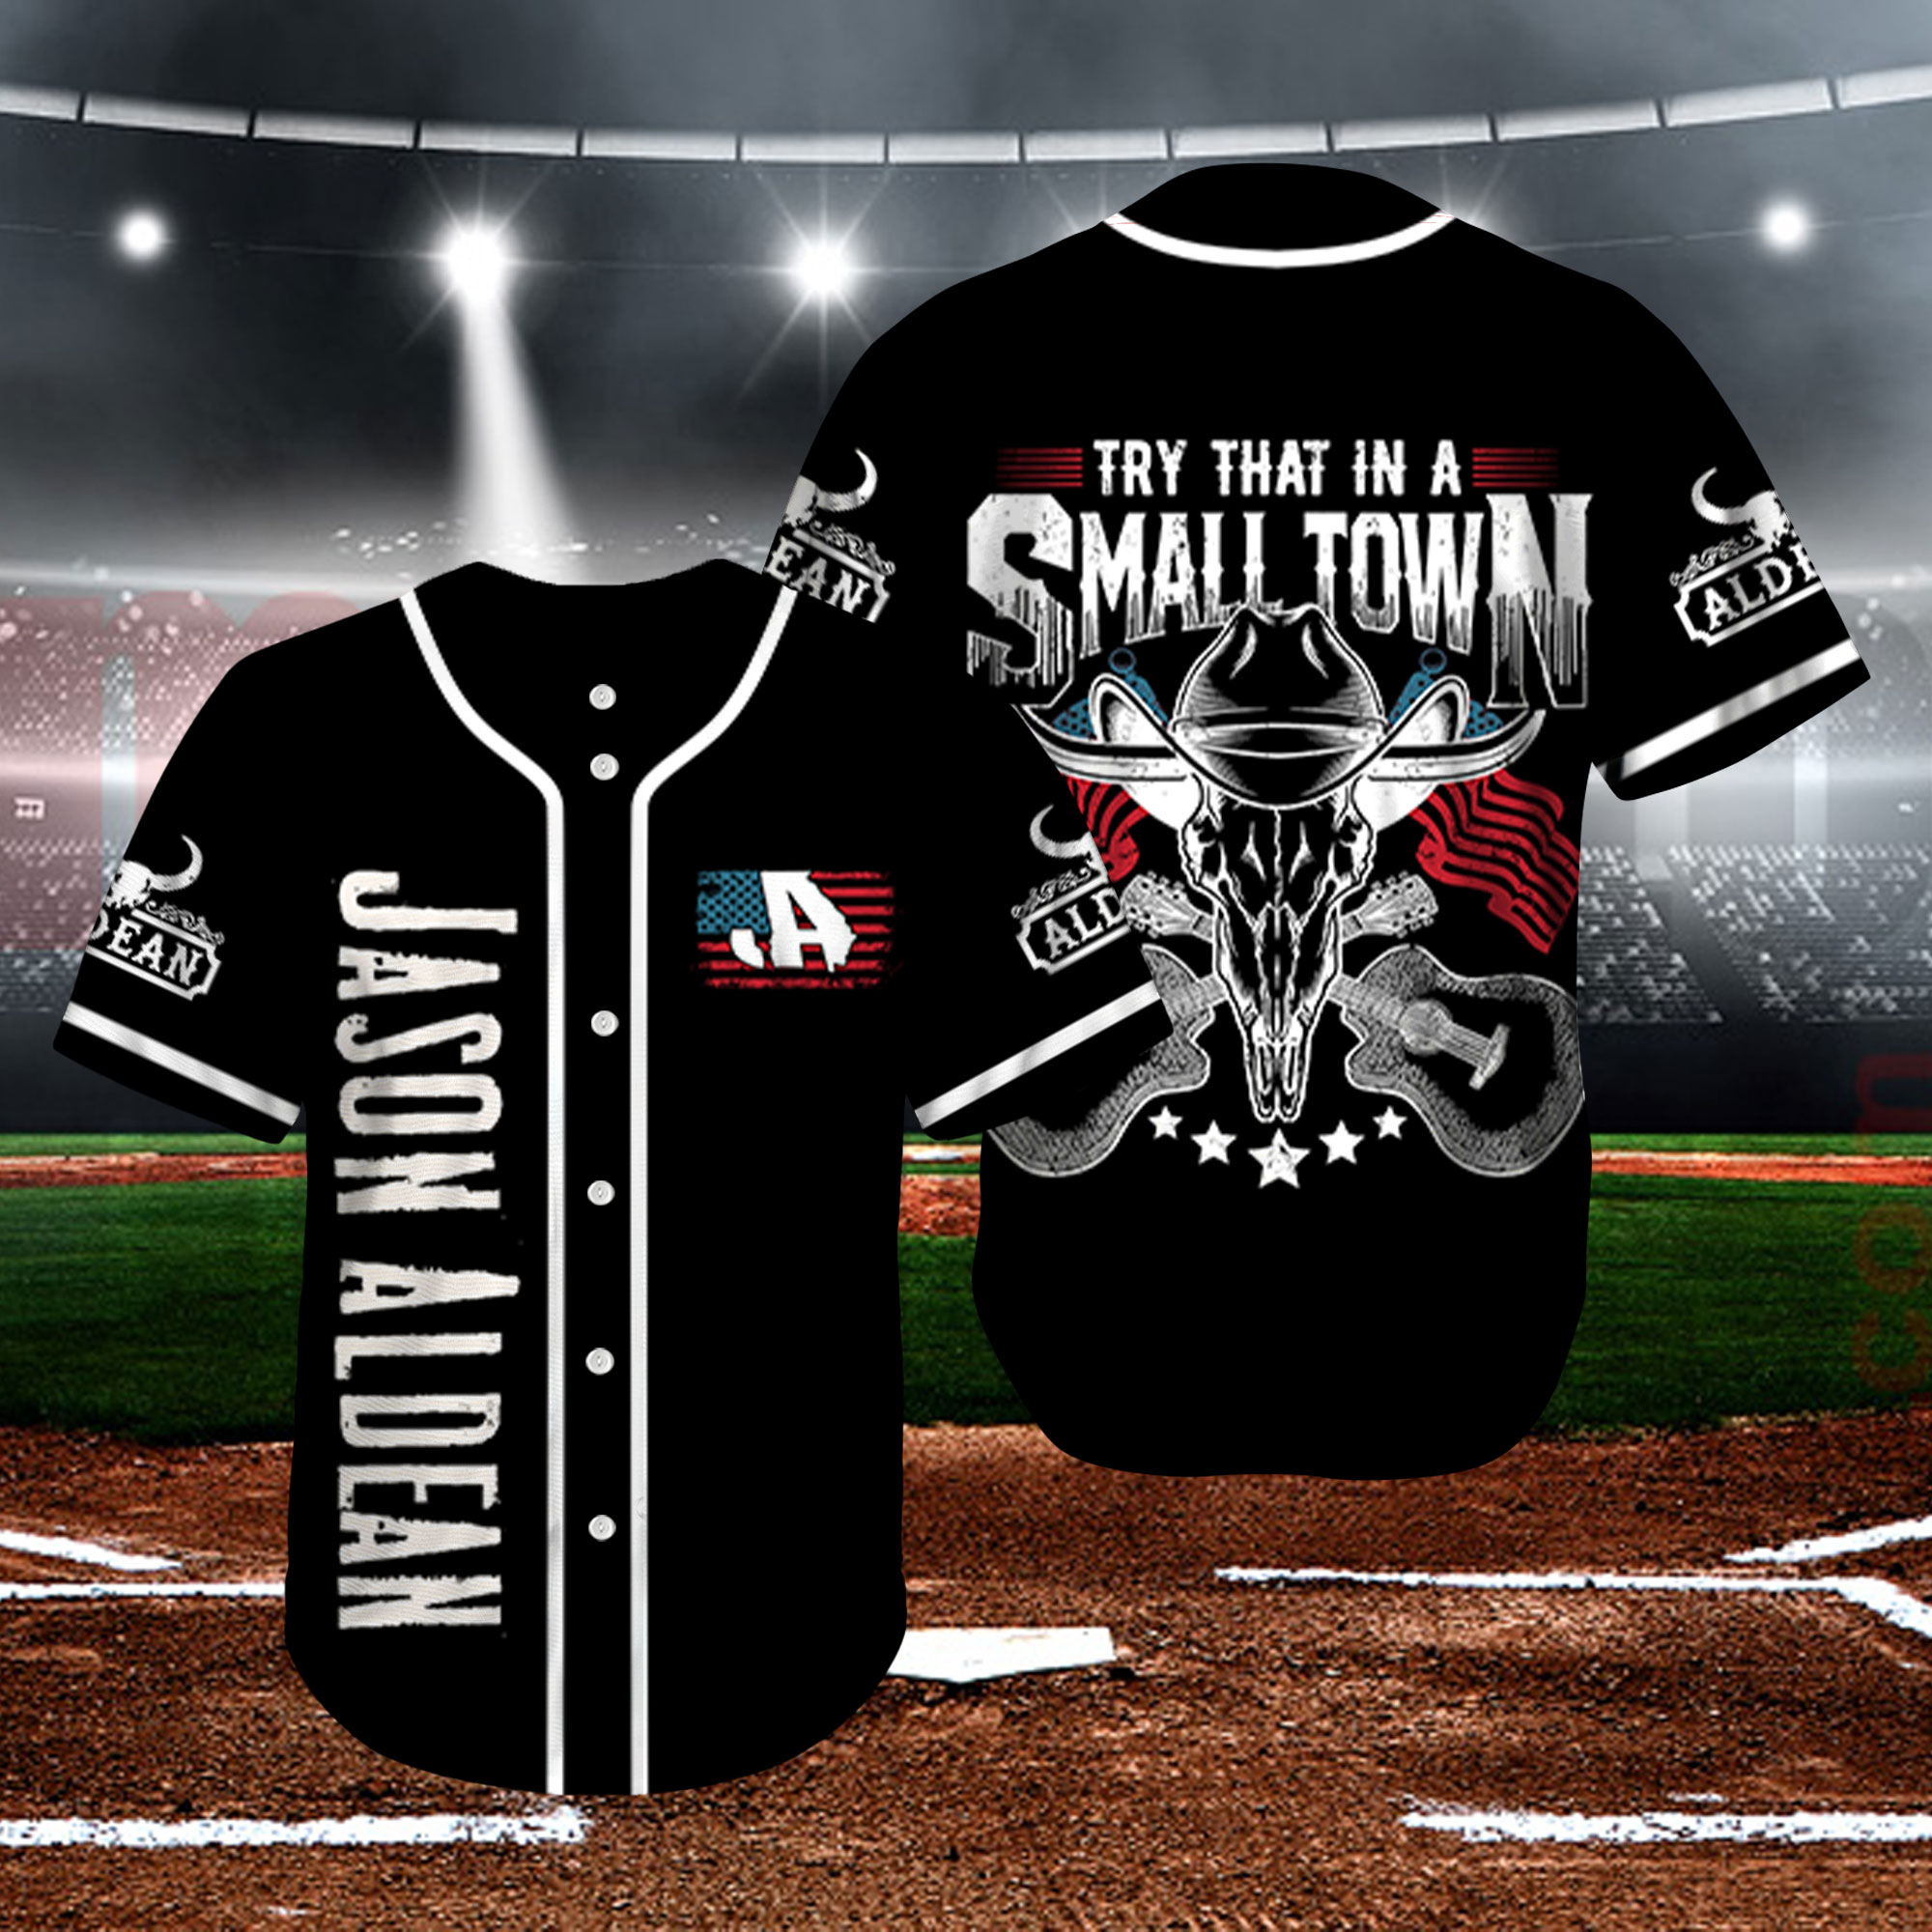 Try That In A Small Town Jason Aldean Black Design Baseball Jersey